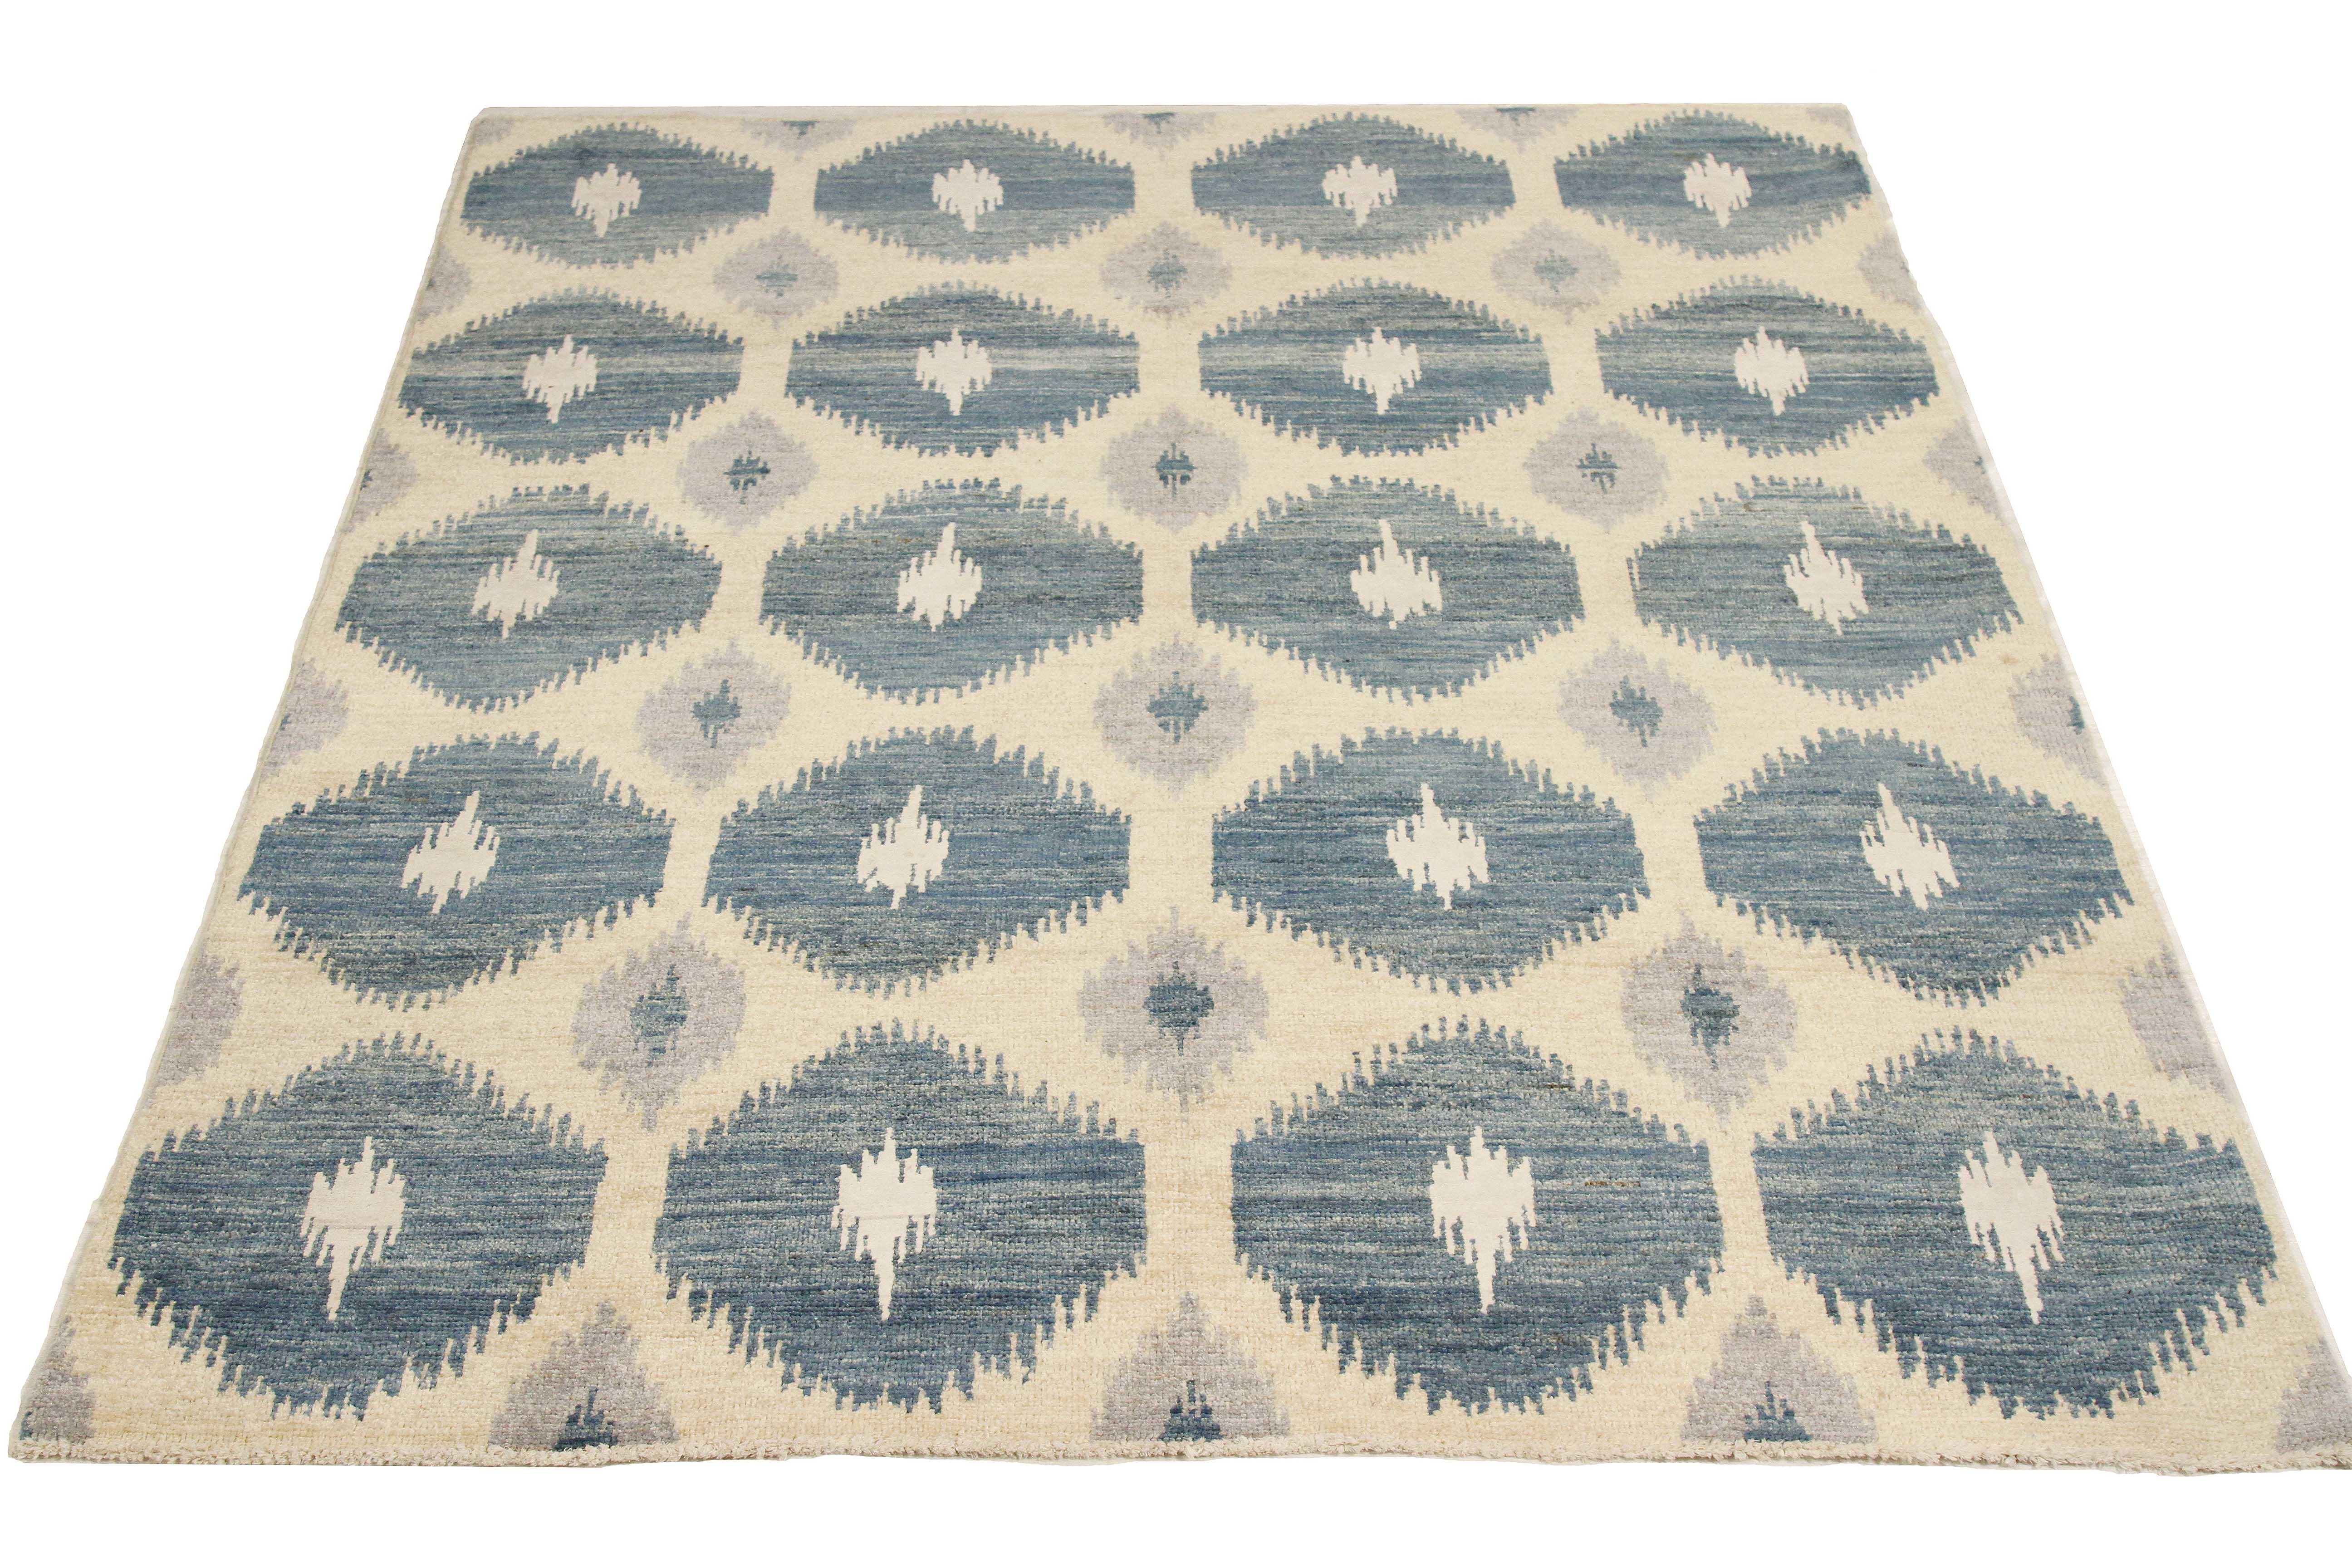 Afghan rug handwoven from the finest sheep’s wool and colored with all-natural vegetable dyes that are safe for humans and pets. It’s a traditional Ikat design featuring a lovely pattern of white and navy hexagonal details on an ivory field. It’s a